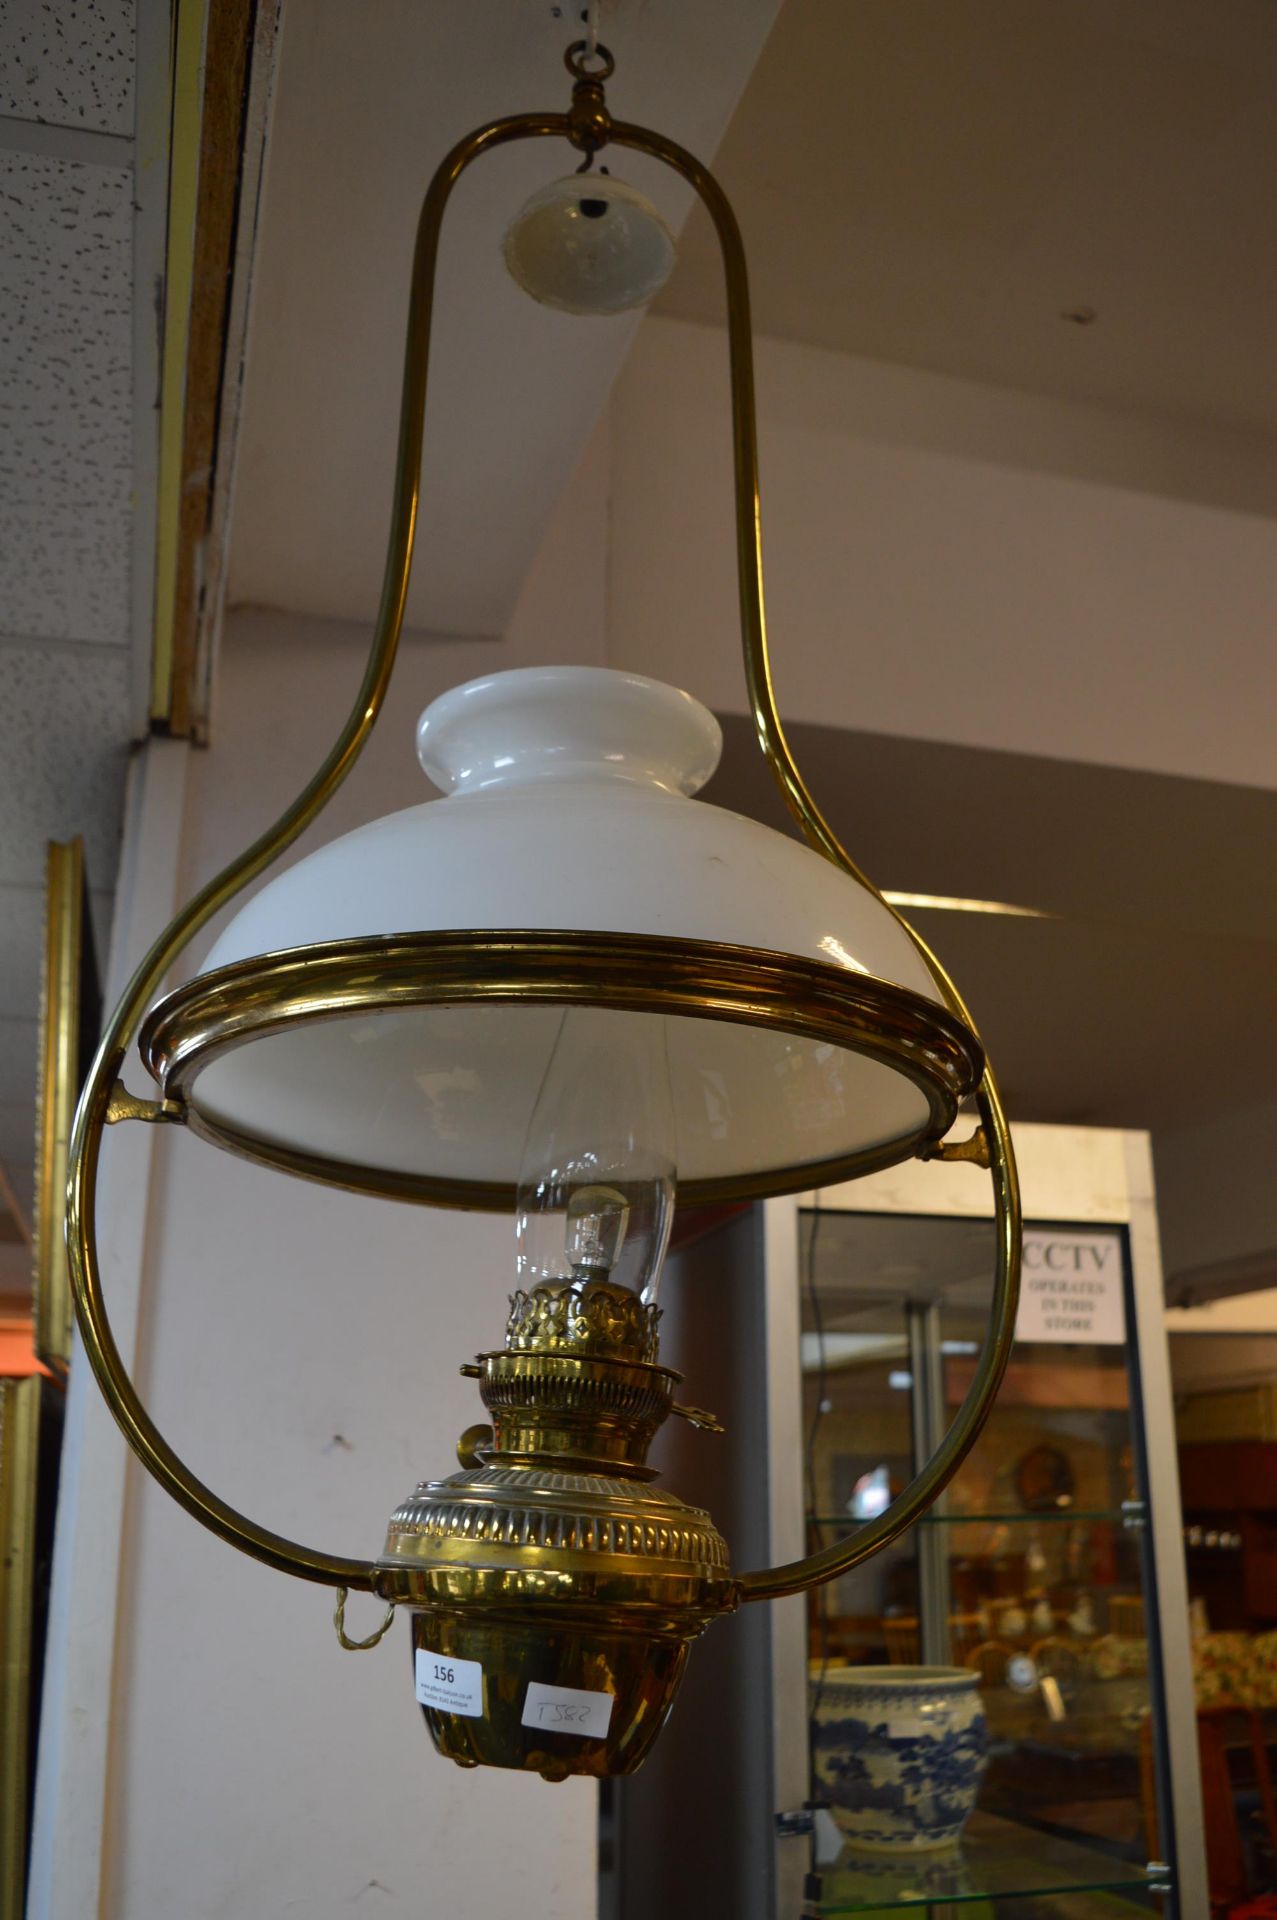 Period Brass Oil Lamp with White Glass Shade (Converted to Electricity)